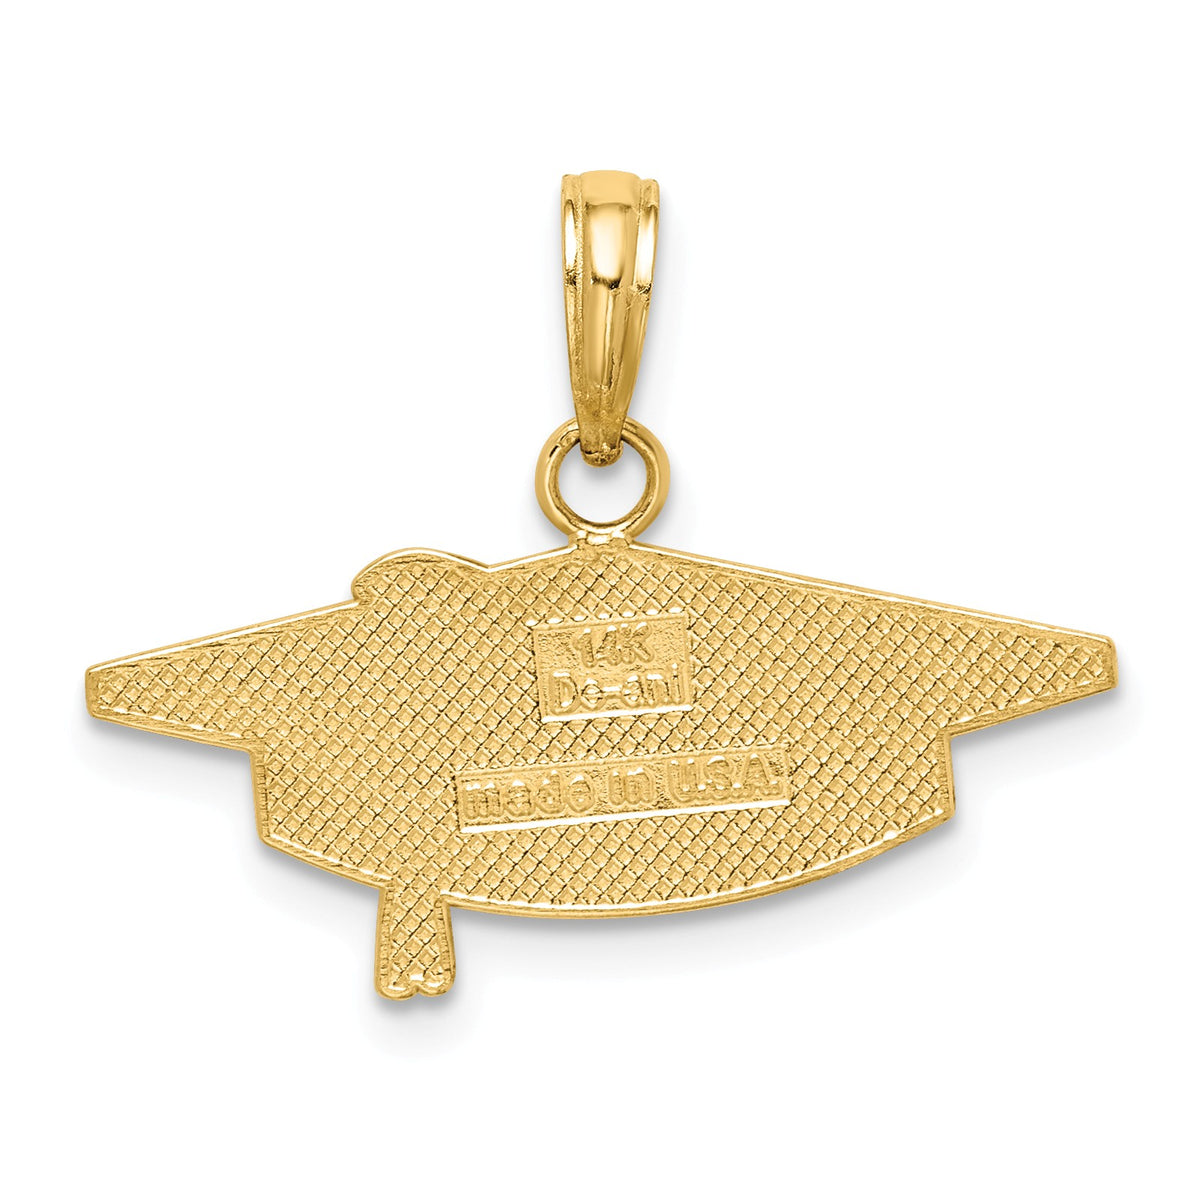 Alternate view of the 14k Yellow Gold Graduation Cap Pendant, 23mm by The Black Bow Jewelry Co.